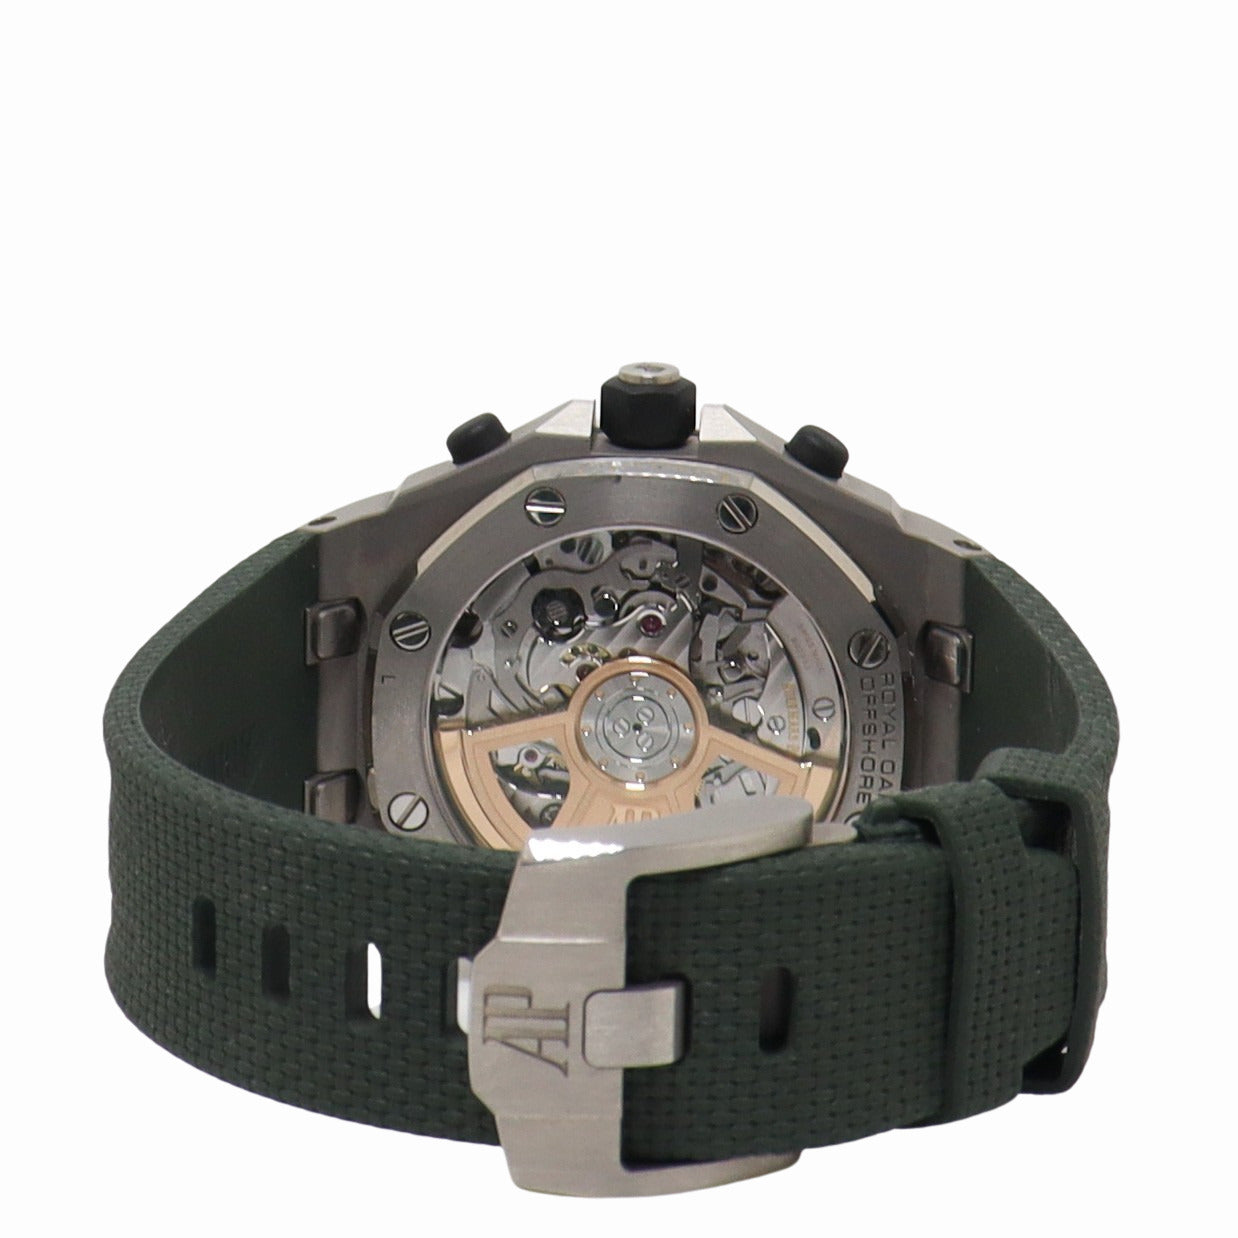 Audemars Piguet Royal Oak Offshore 42mm Khaki Green Chronograph Dial Watch Reference# 26238TI.OO.A056CA.01 - Happy Jewelers Fine Jewelry Lifetime Warranty